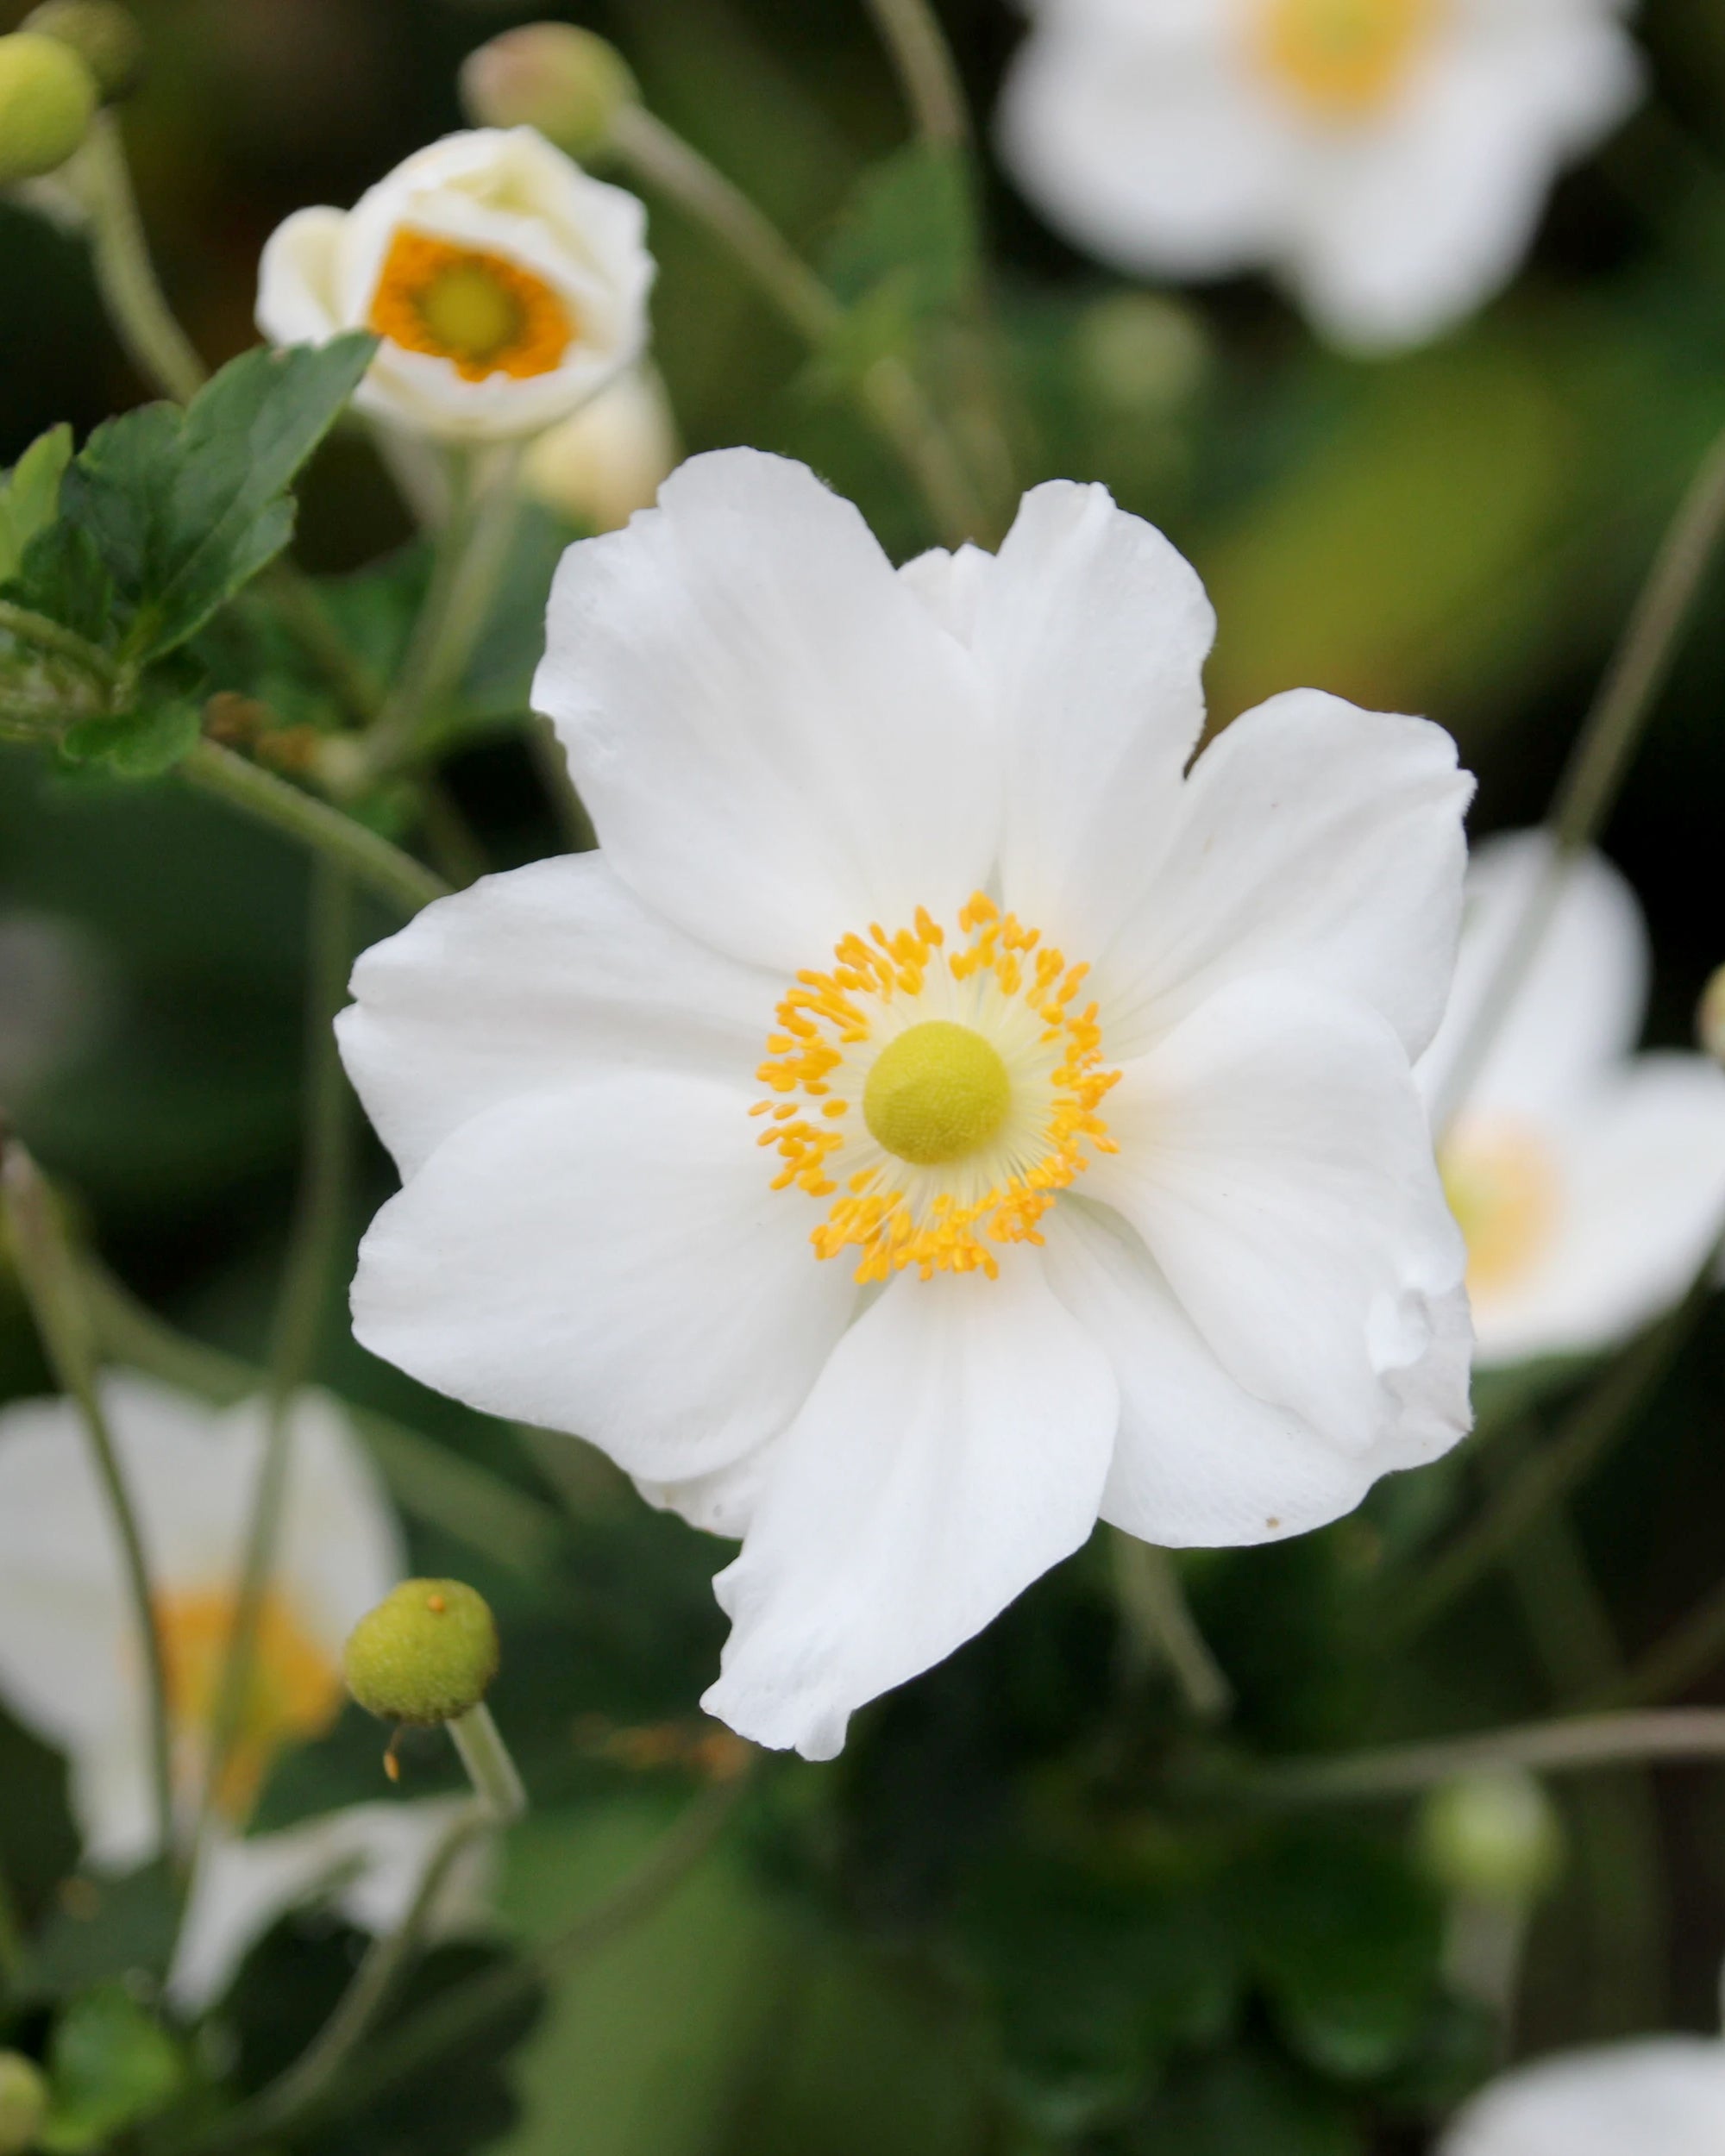 Anemone × hybrida 'Whirlwind' bare roots — Buy white Japanese anemones  online at Farmer Gracy UK